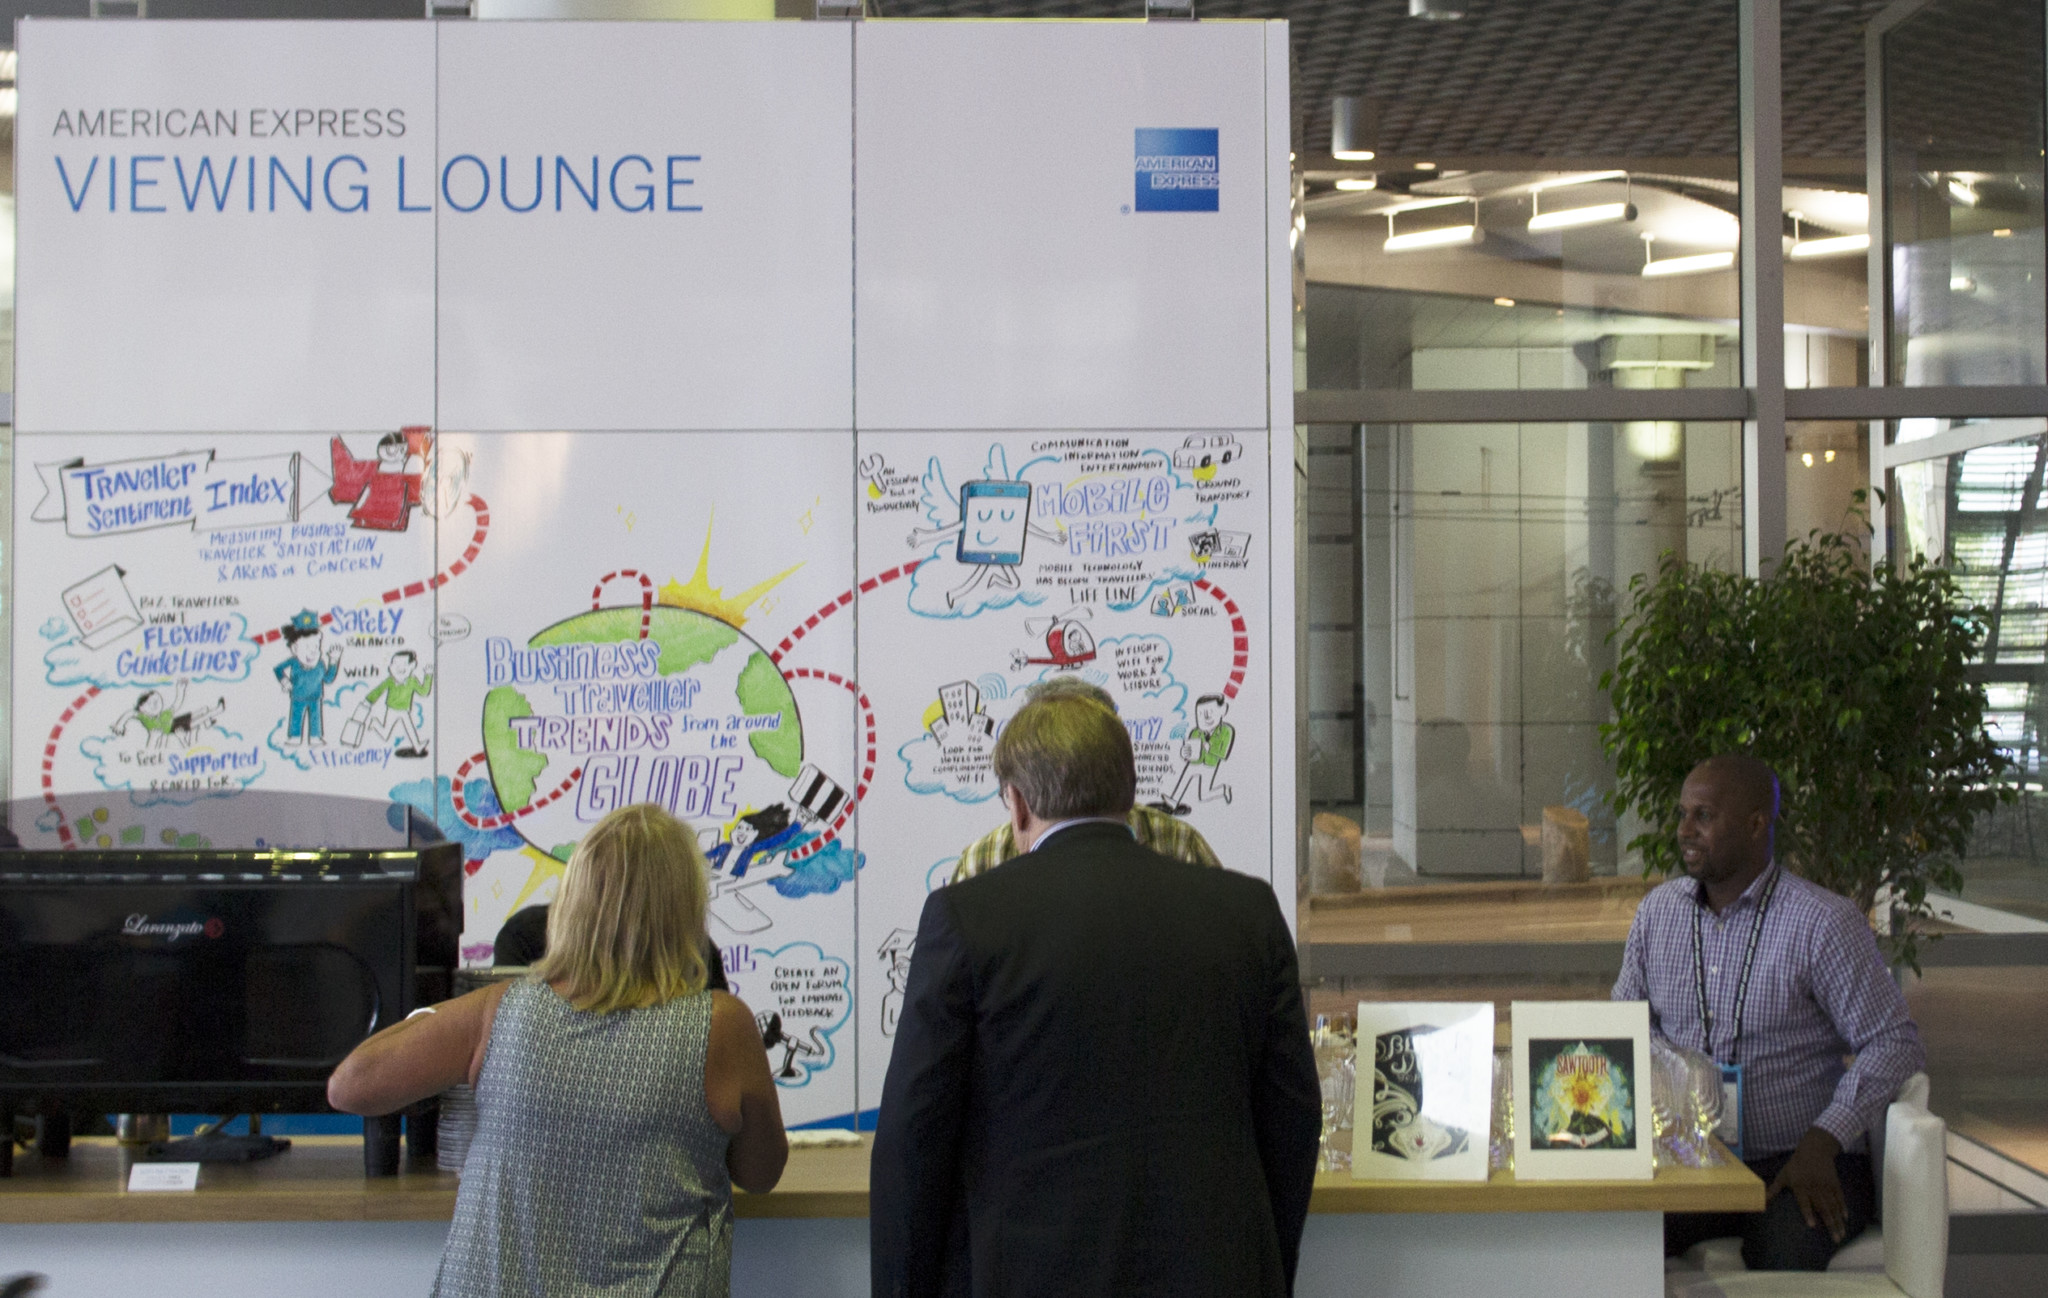 Two conference attendees look at imagethink infographic at amex lounge during global business travel association convention in Denver, CO, 2016.